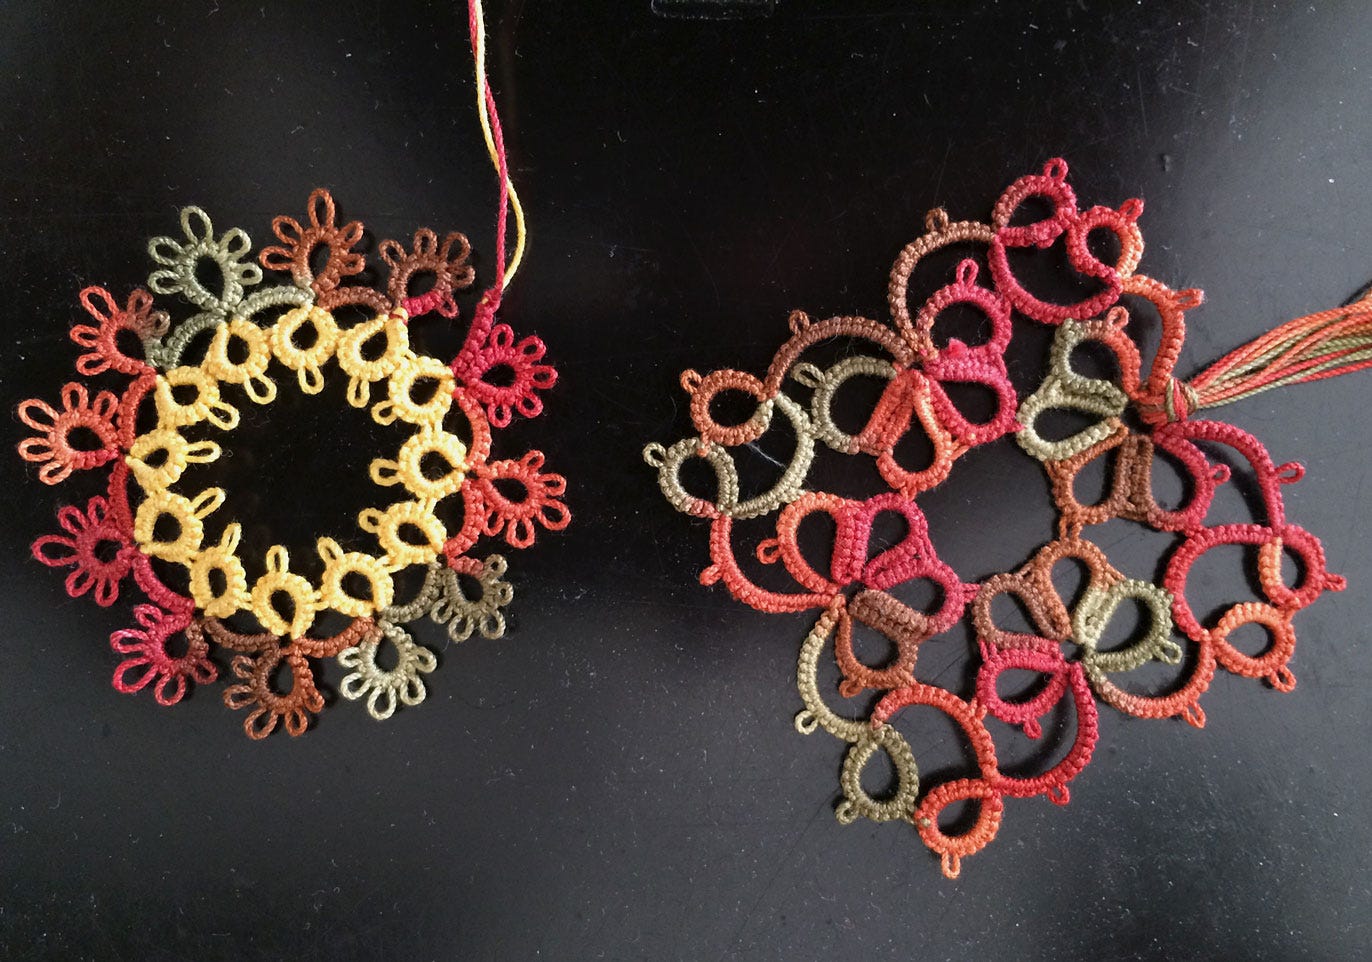 Tatting Unlimited(formerly only free tatting patterns)